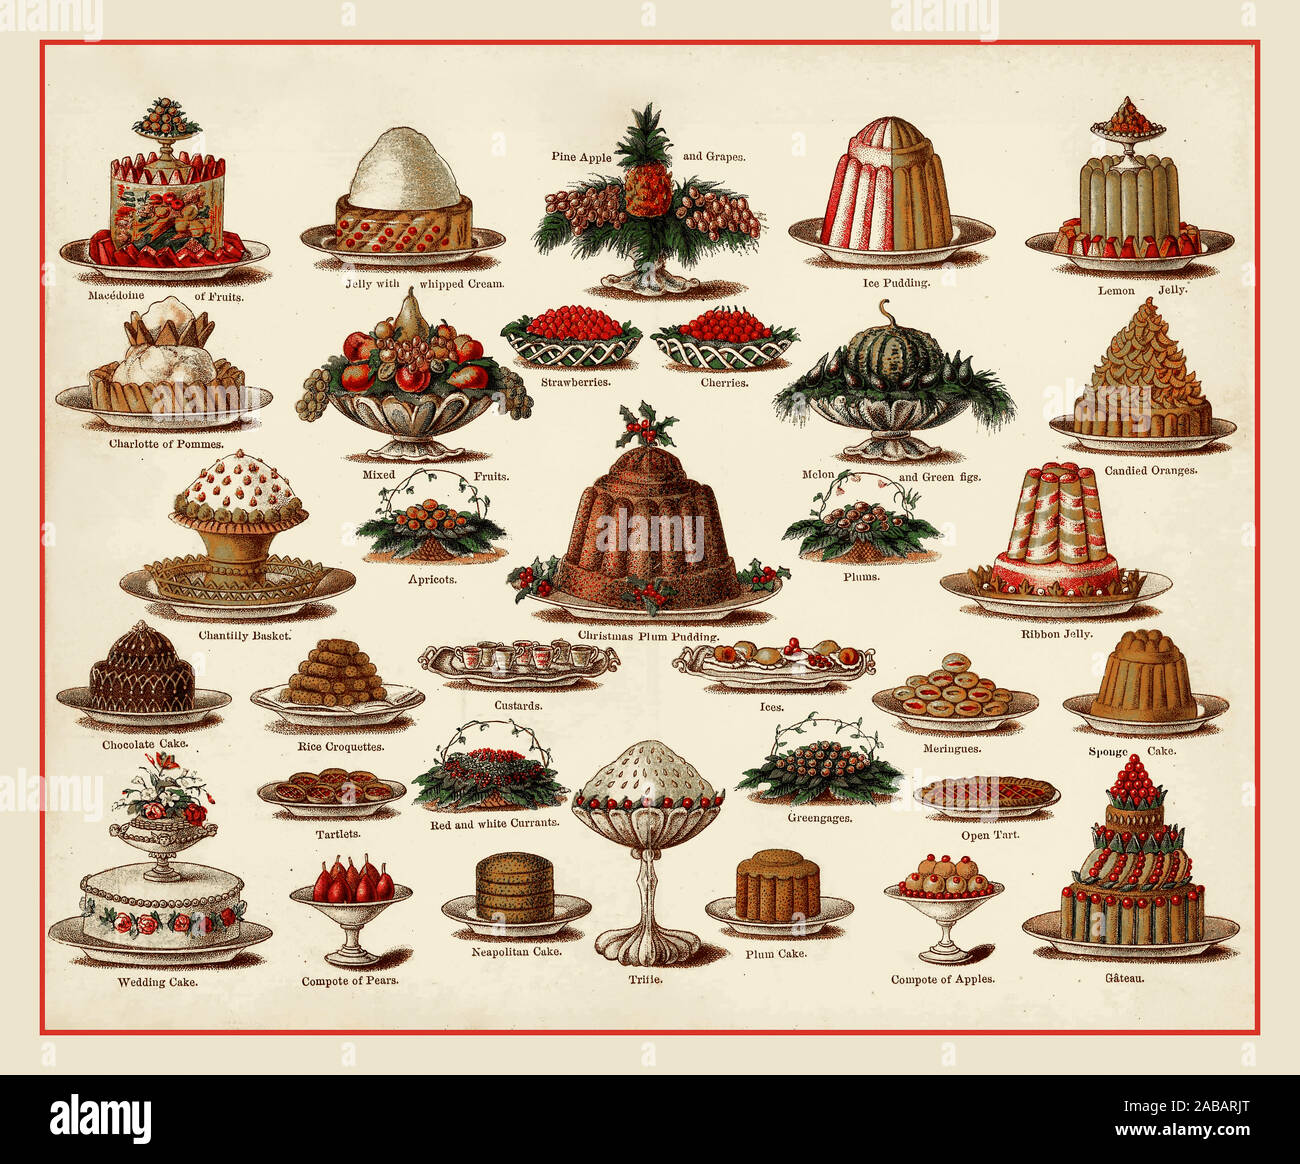 VICTORIAN CHRISTMAS FOOD PUDDINGS DESSERTS CAKE VINTAGE MRS BEETON'S Colour lithograph from Mrs Beetons Cookery Book illustrating wide variety of English Christmas Victorian Puddings 1800s-1900s Stock Photo